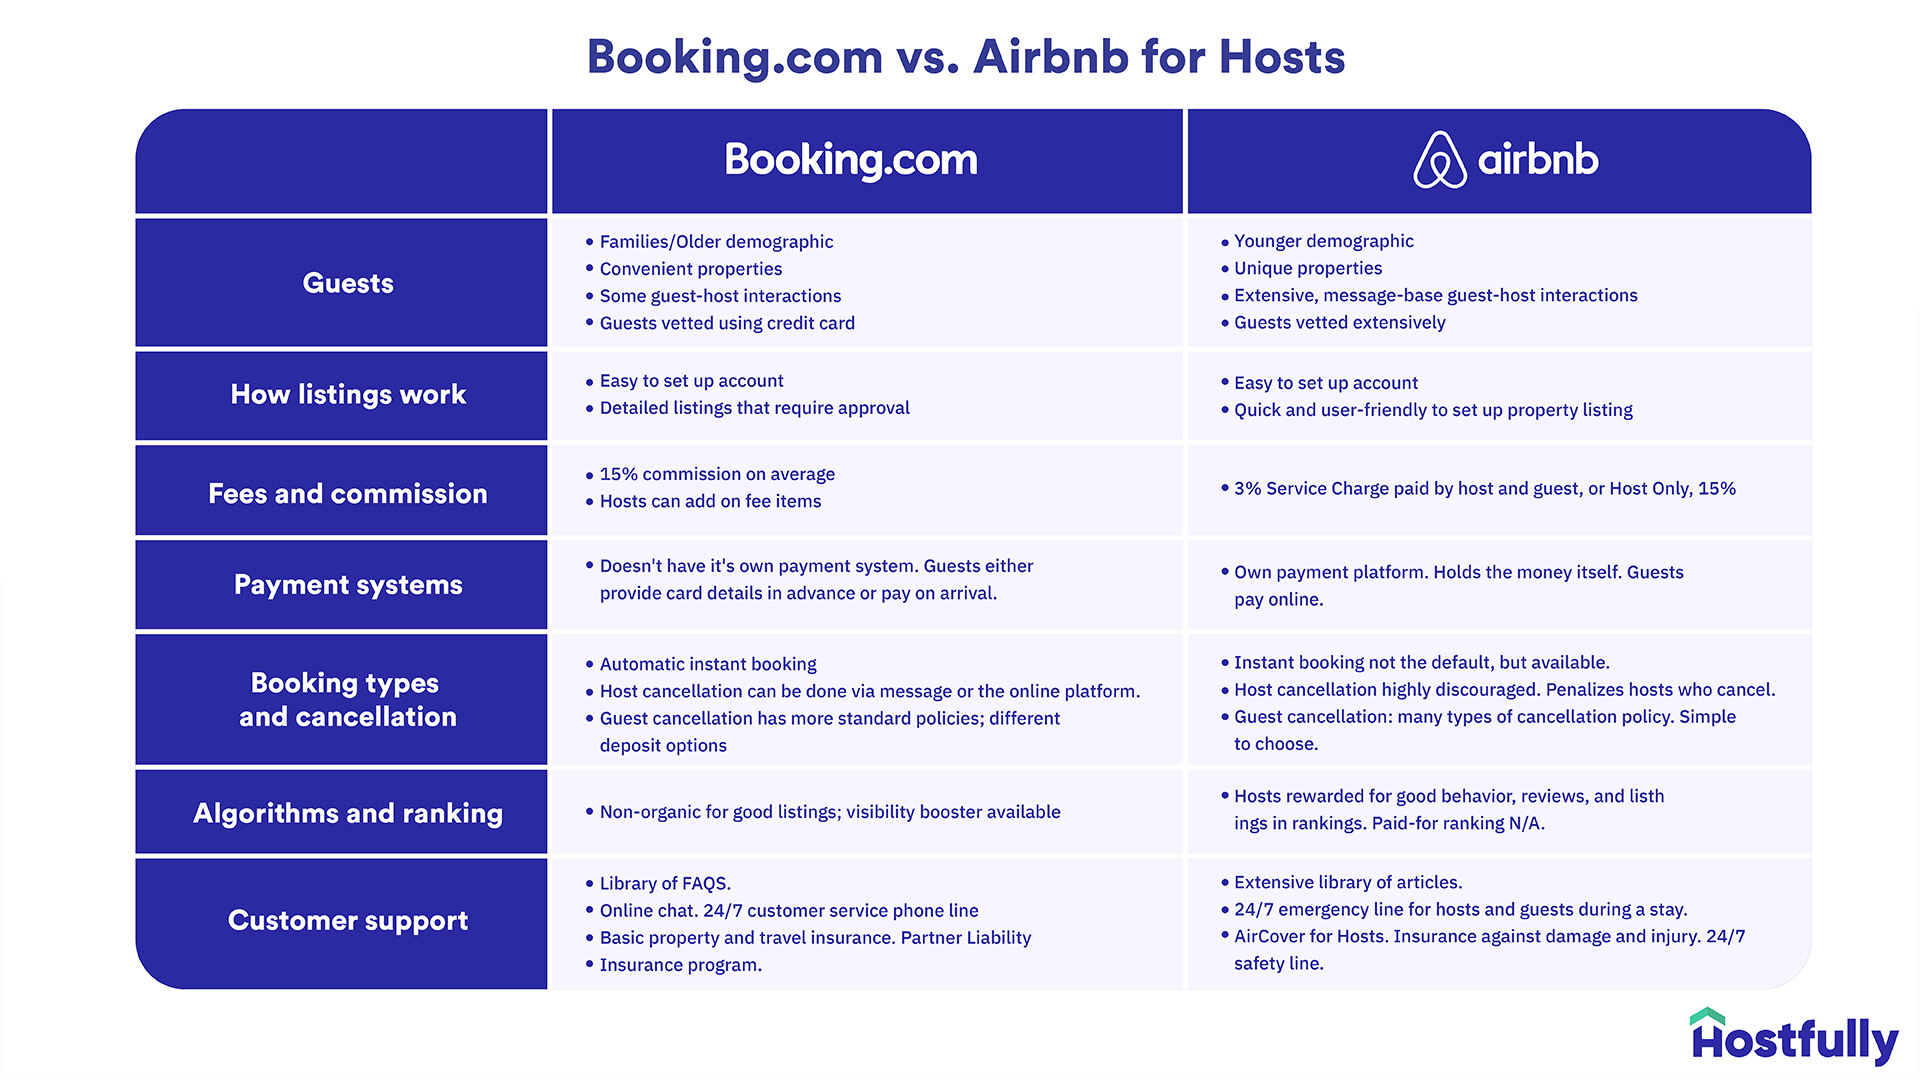 Booking.com vs. Airbnb for Hosts